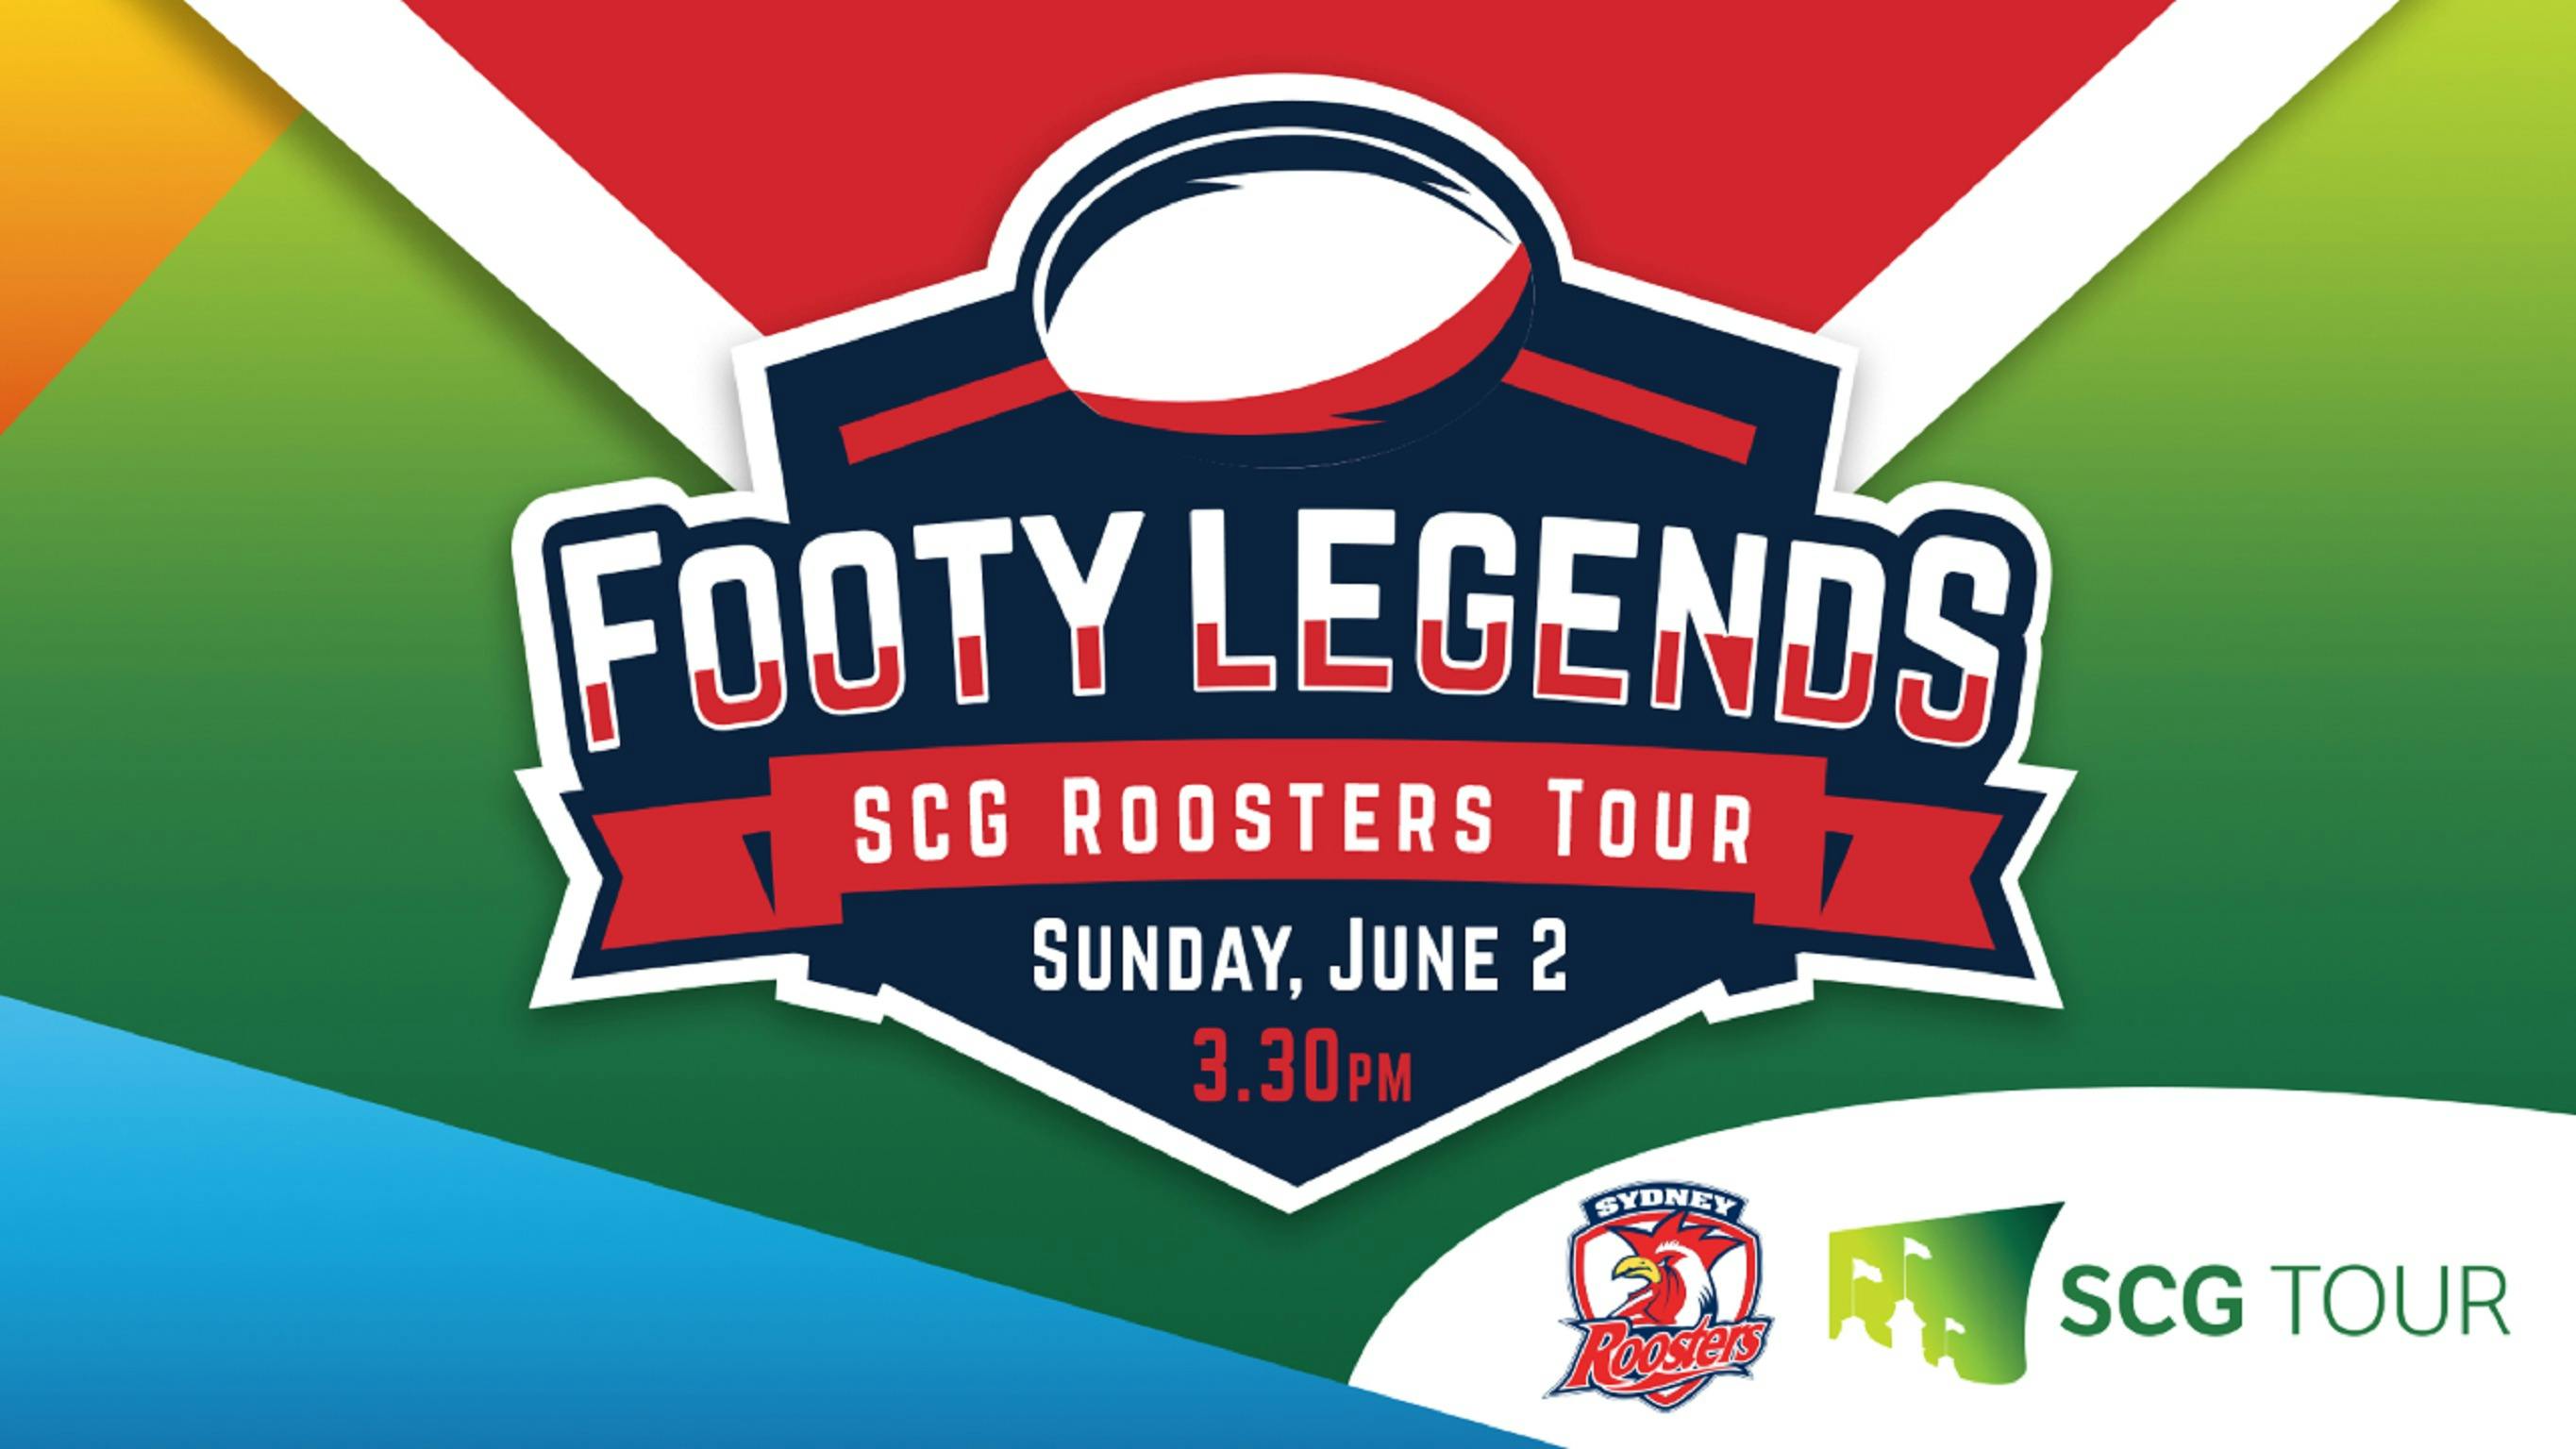 Download Sydney Roosters Footy Legends Tour at the SCG | Sydney ...